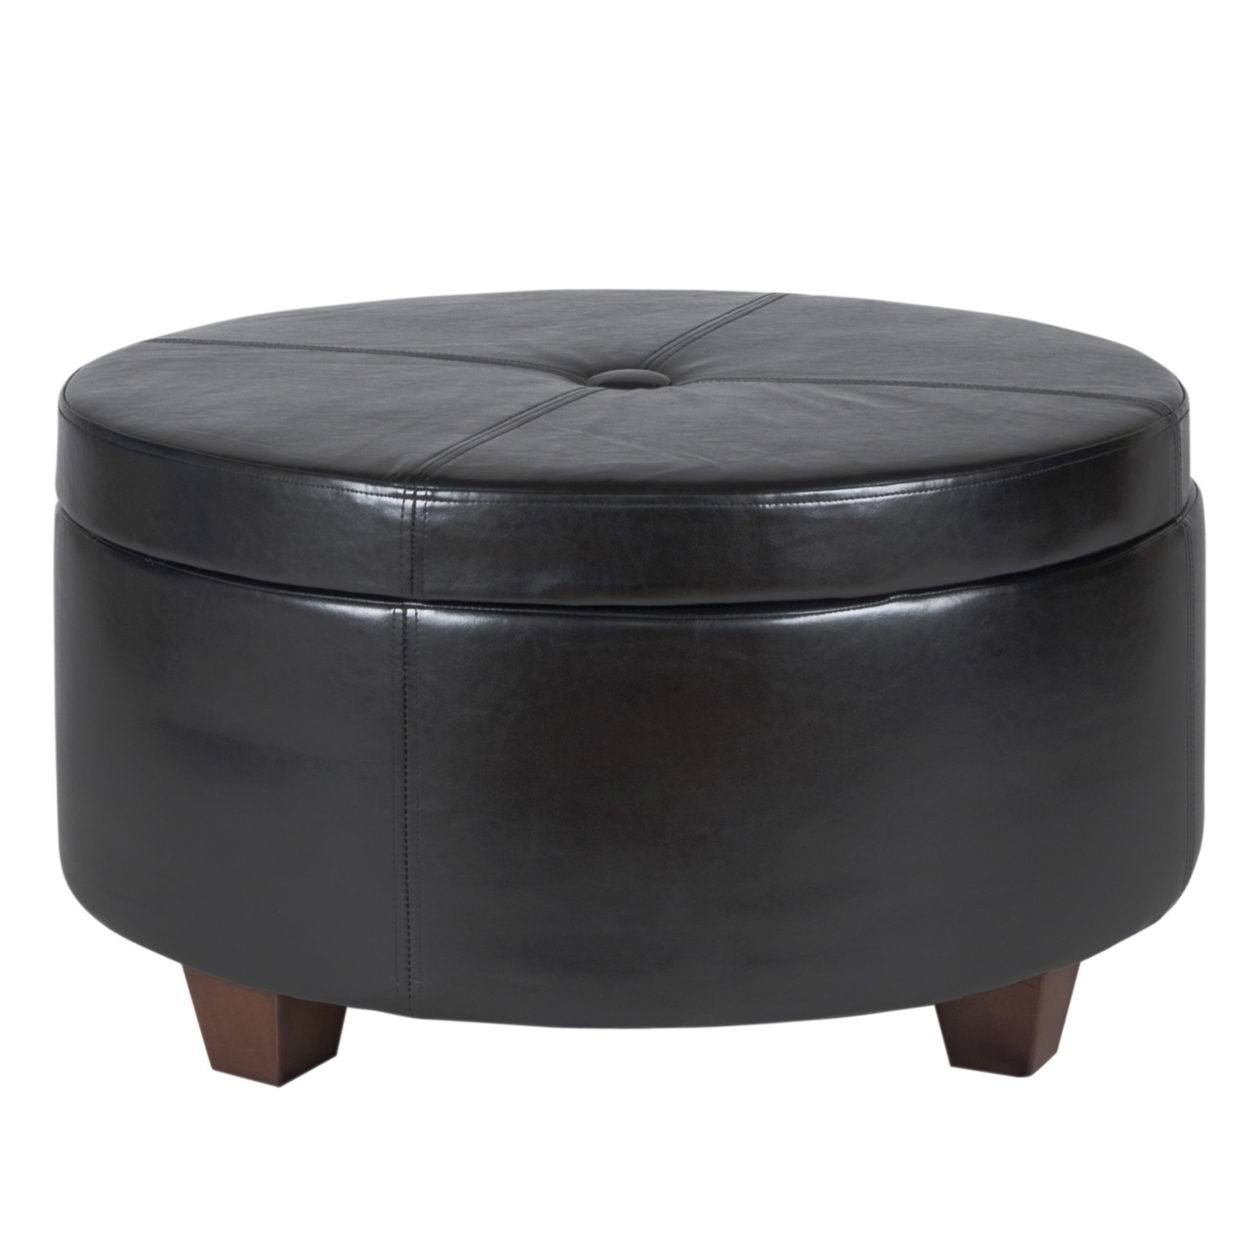 Leatherette Single Button Tufted Round Ottoman With Wooden Feet, Large, Black And Brown-Saltoro Sherpi